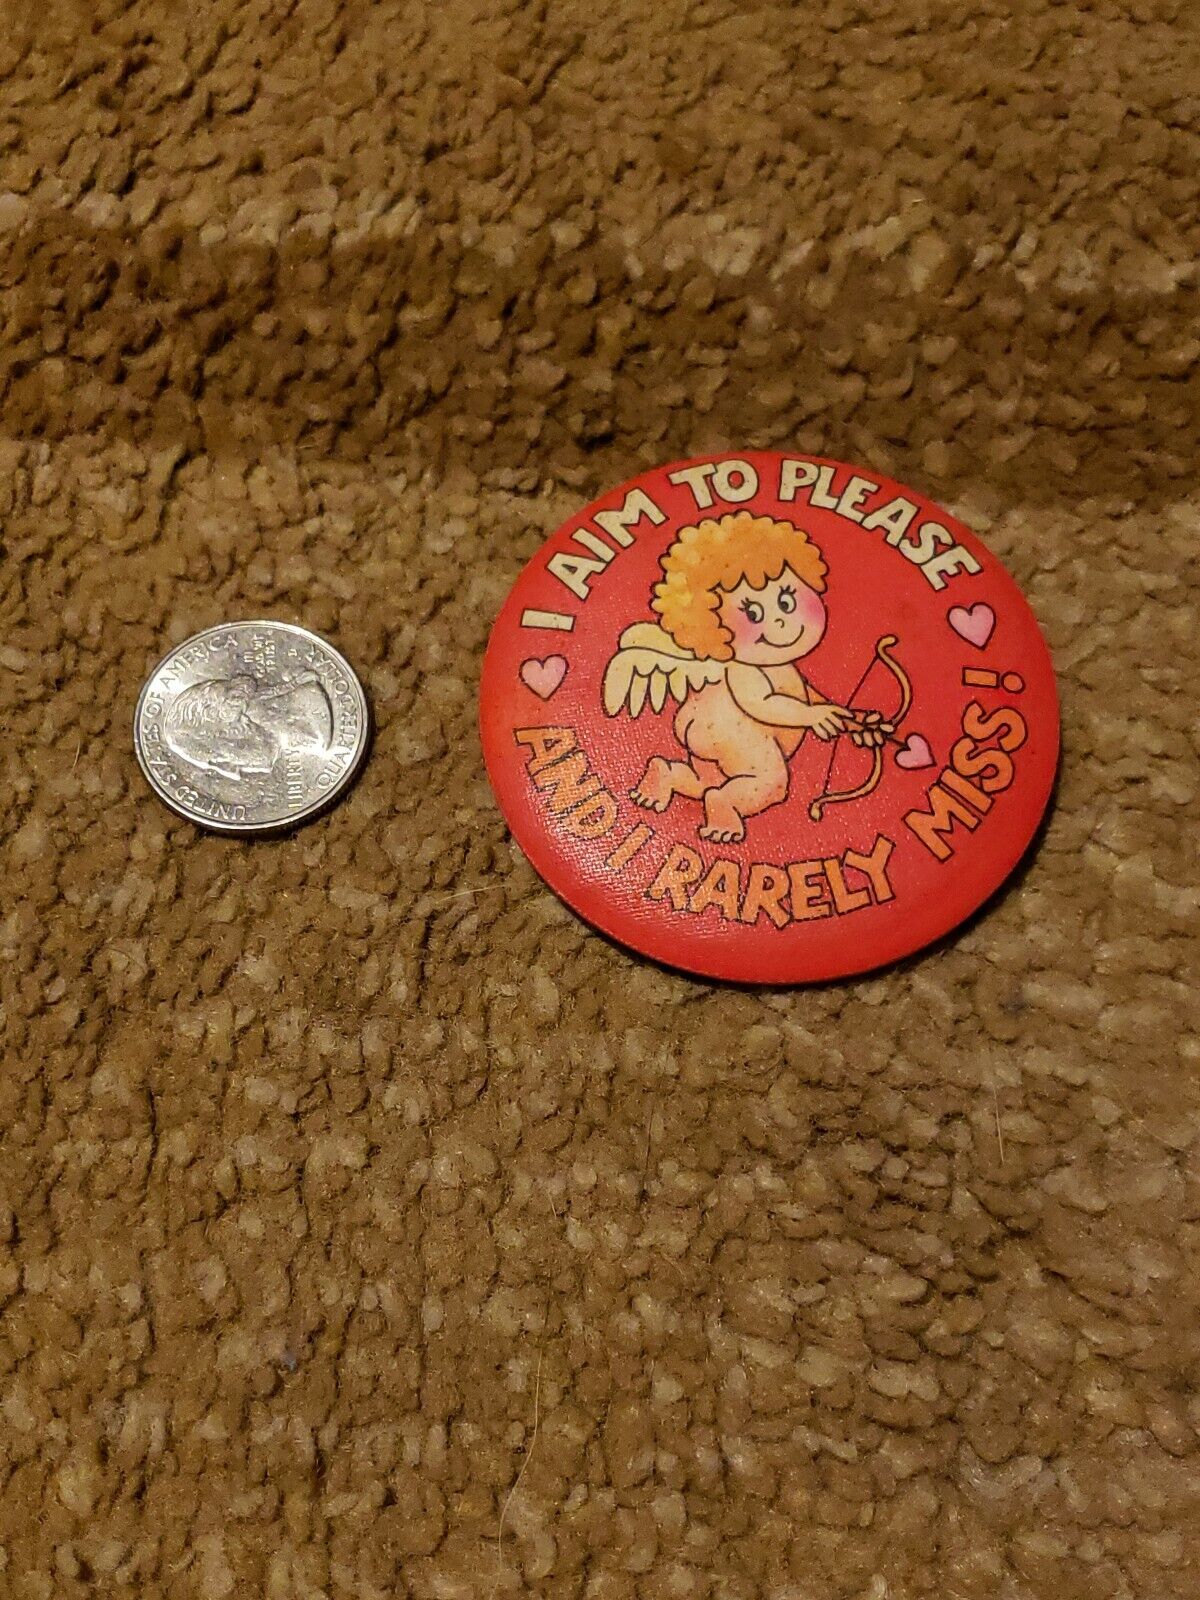 I Aim To Please And I Rarely Miss Cupid Button Pin Pinback